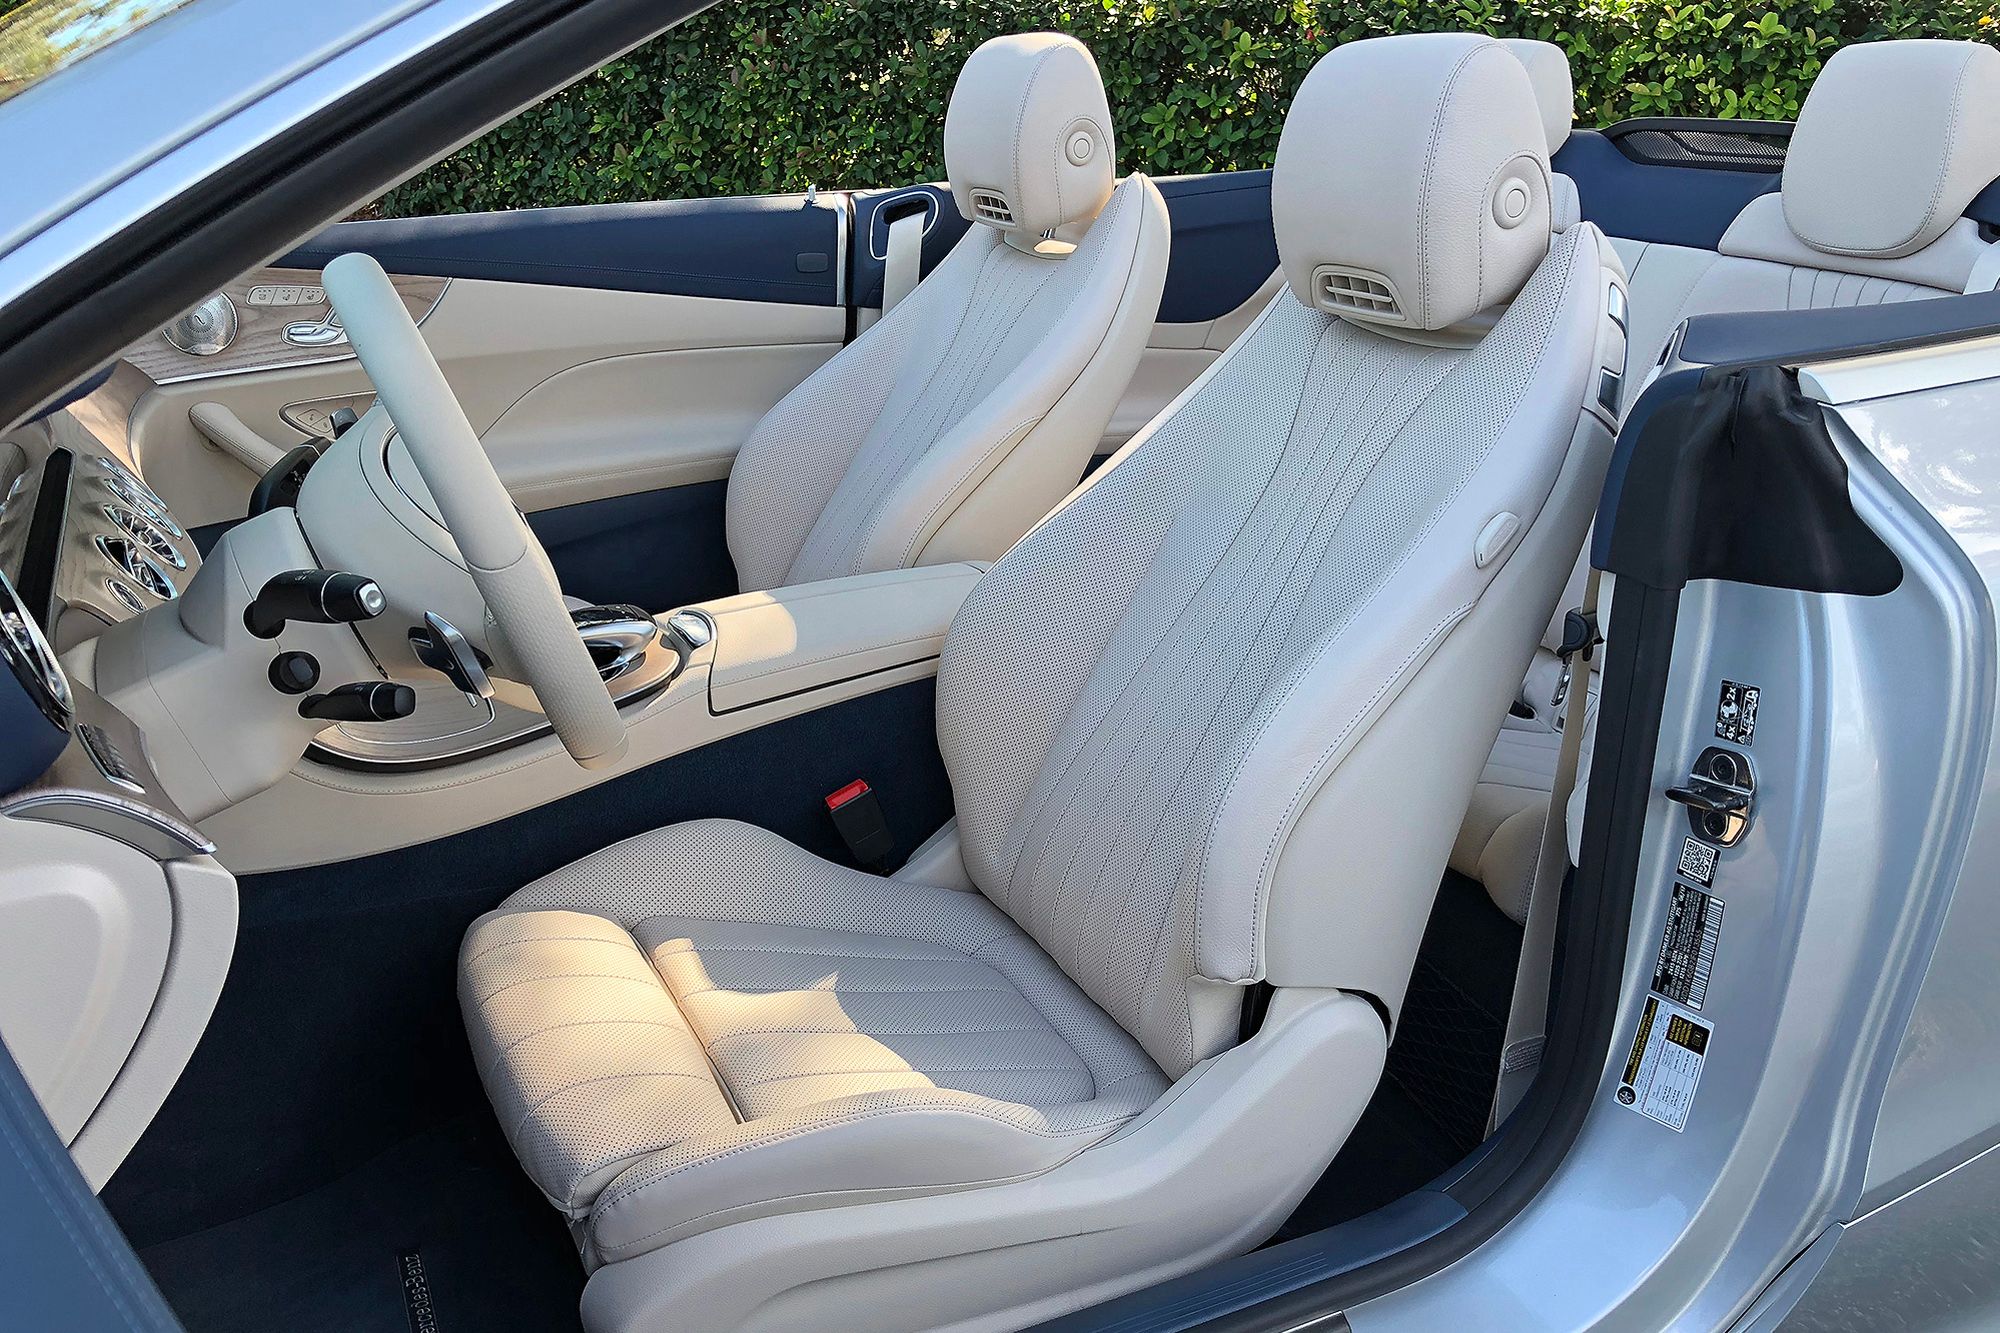 Heated, vented, & massaging front seats